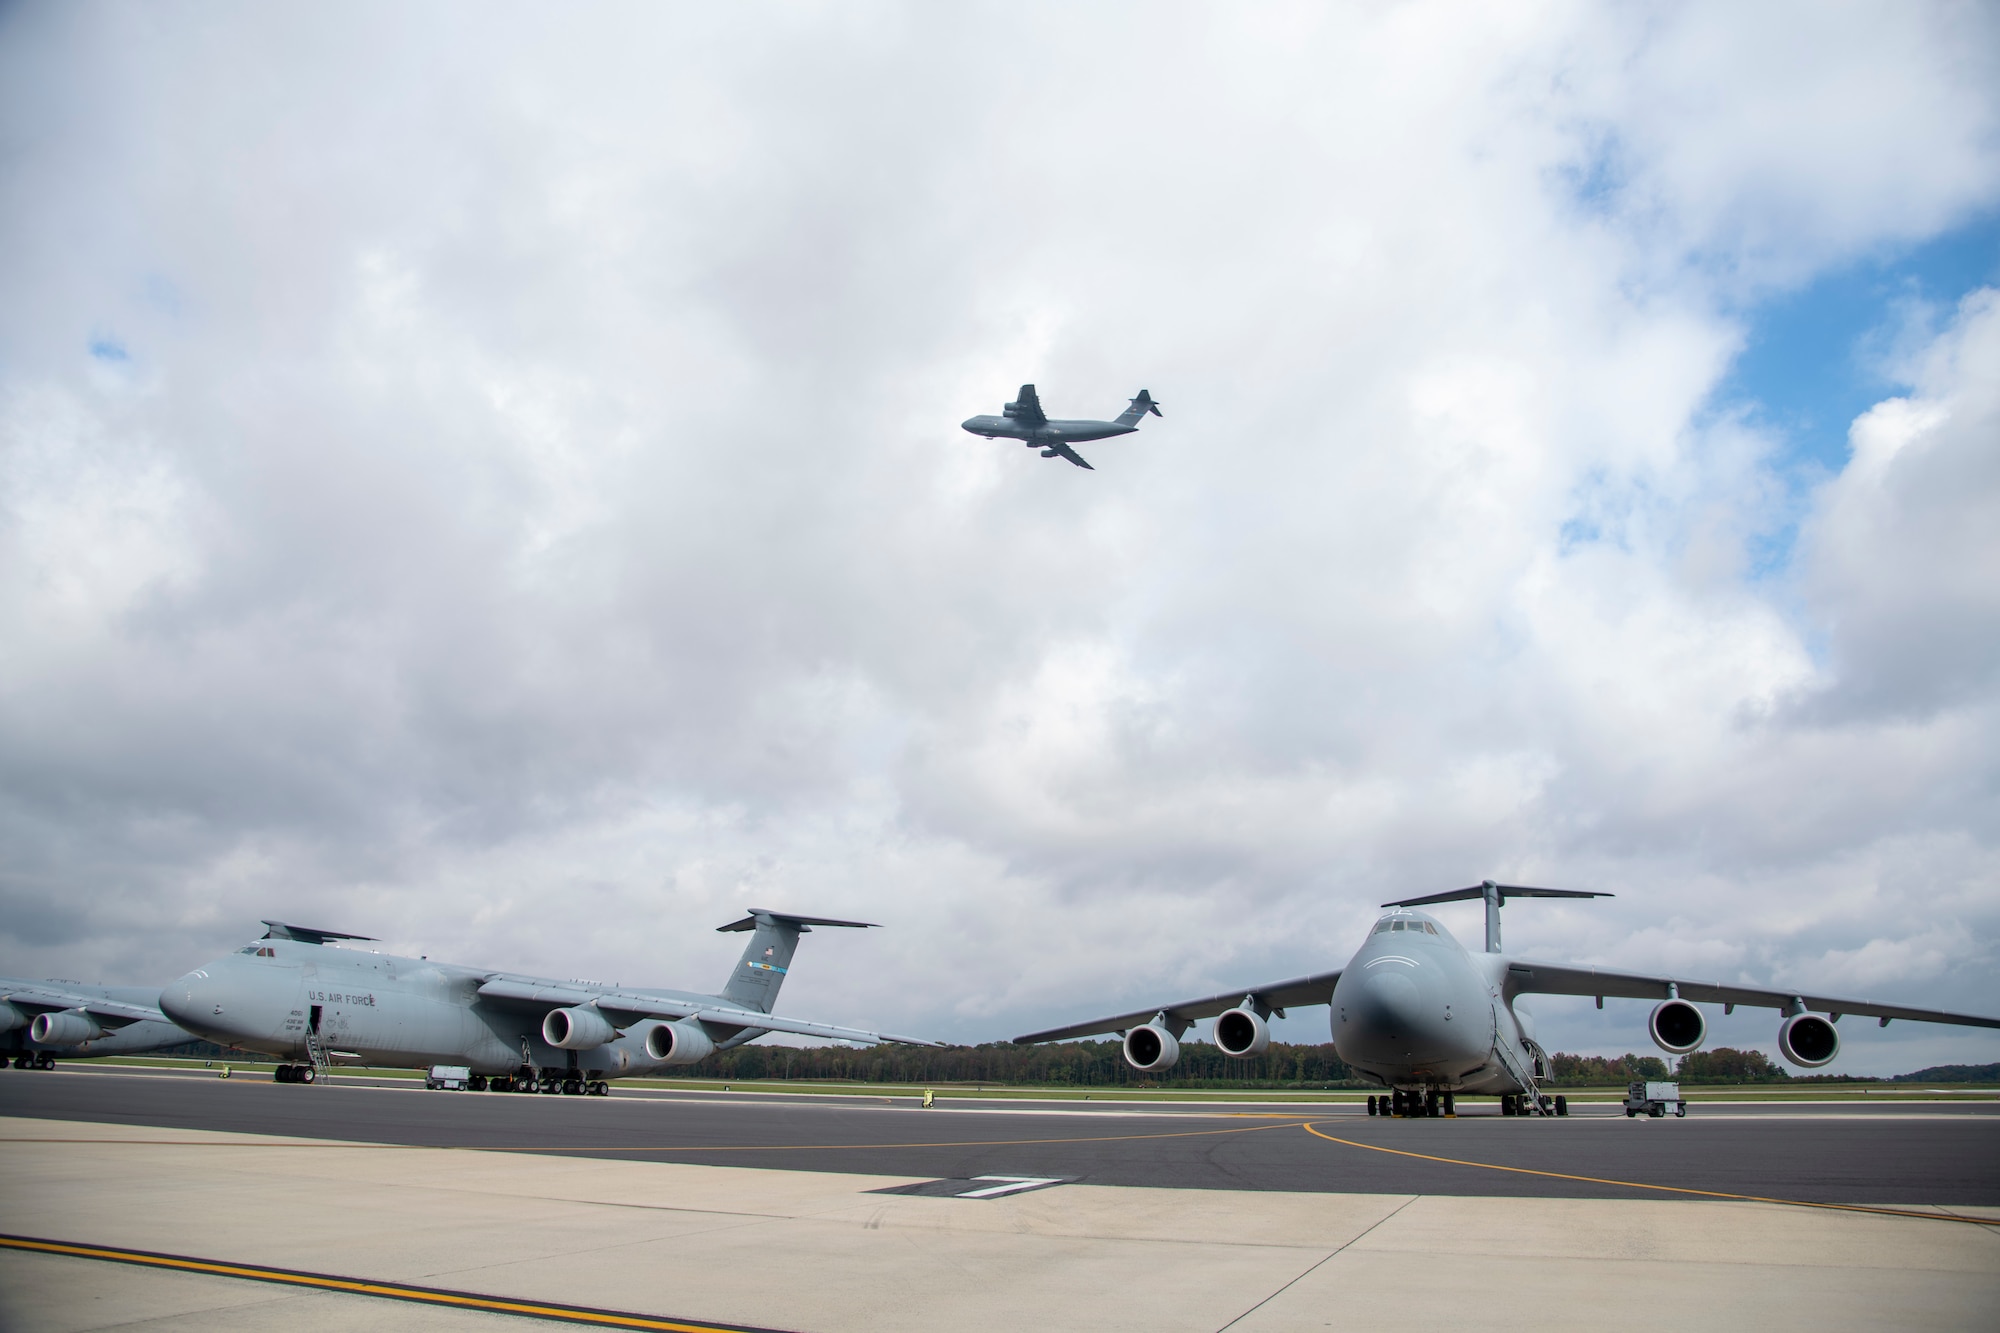 A C-5M Super Galaxy flies over Dover Air Force Base, Delaware, Oct. 26, 2021. The C-5M, with a cargo load of 281,001 pounds, can fly 2,150 nautical miles, offload, and fly to a second base 500 nautical miles away from the original destination without aerial refueling. (U.S. Air Force photo by Tech. Sgt. Nicole Leidholm)